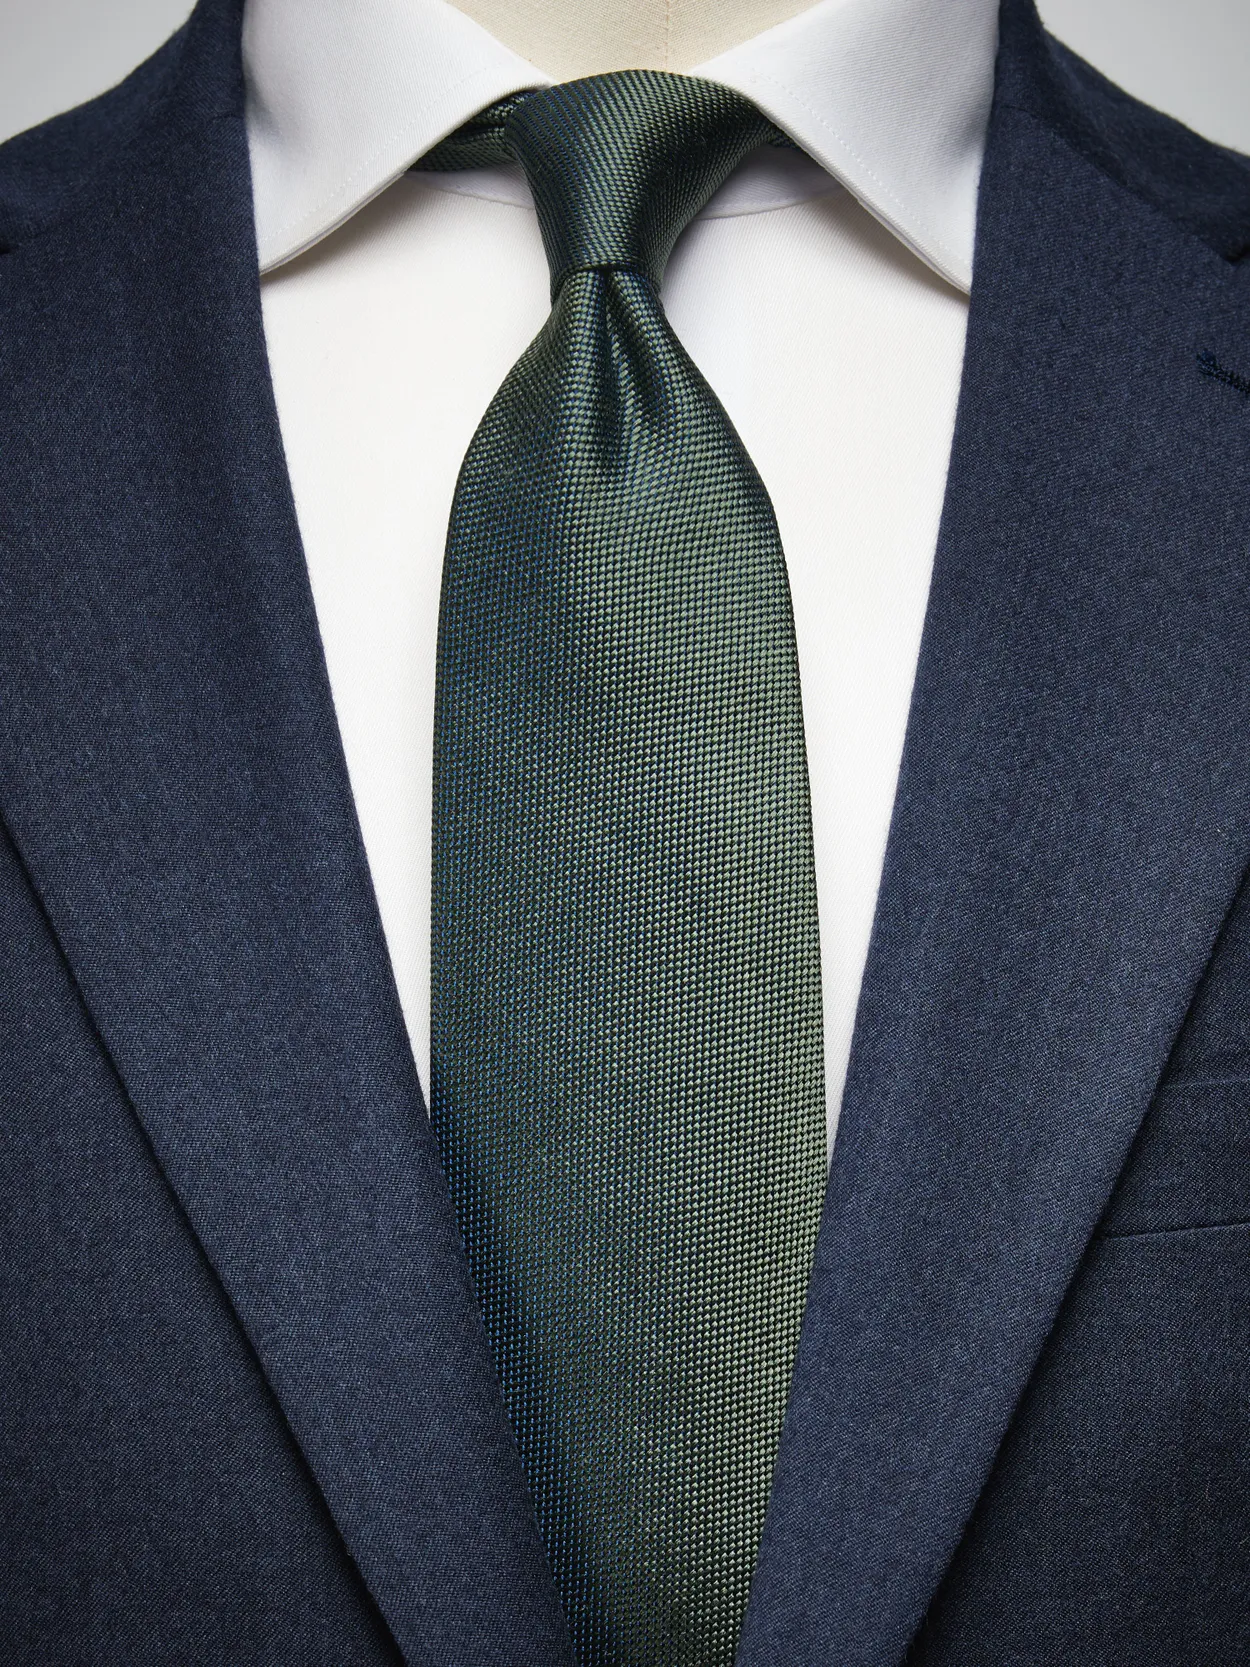 Olive Green Tie Structure